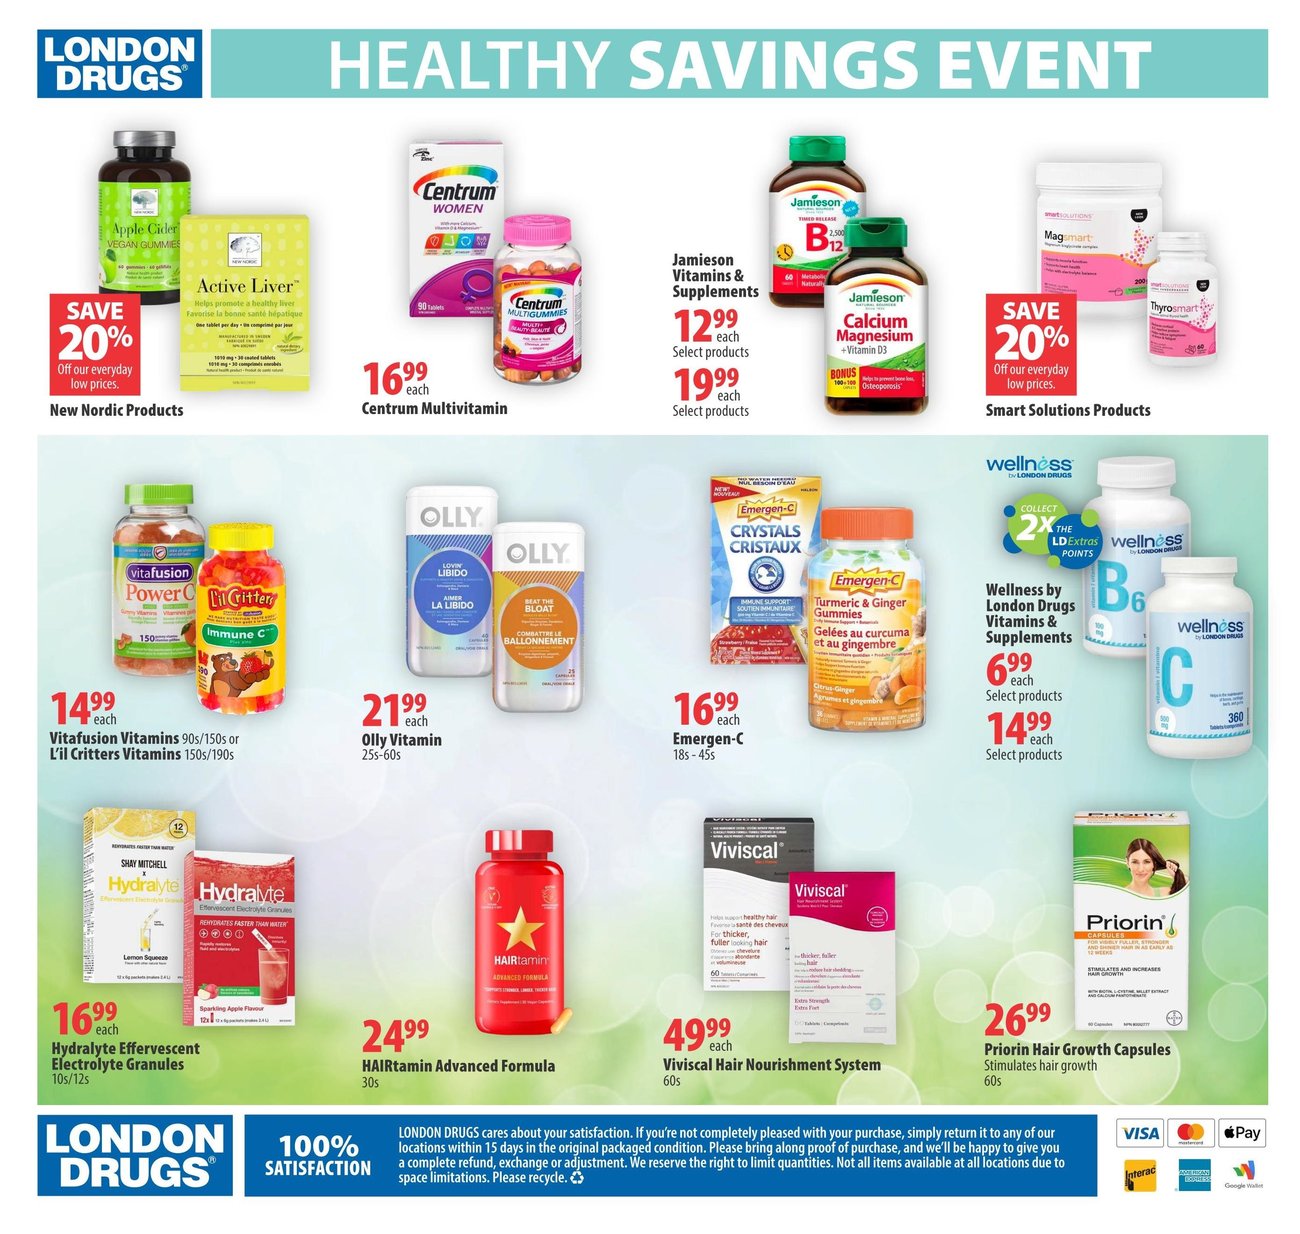 London Drugs - Healthy Savings Event - Page 5